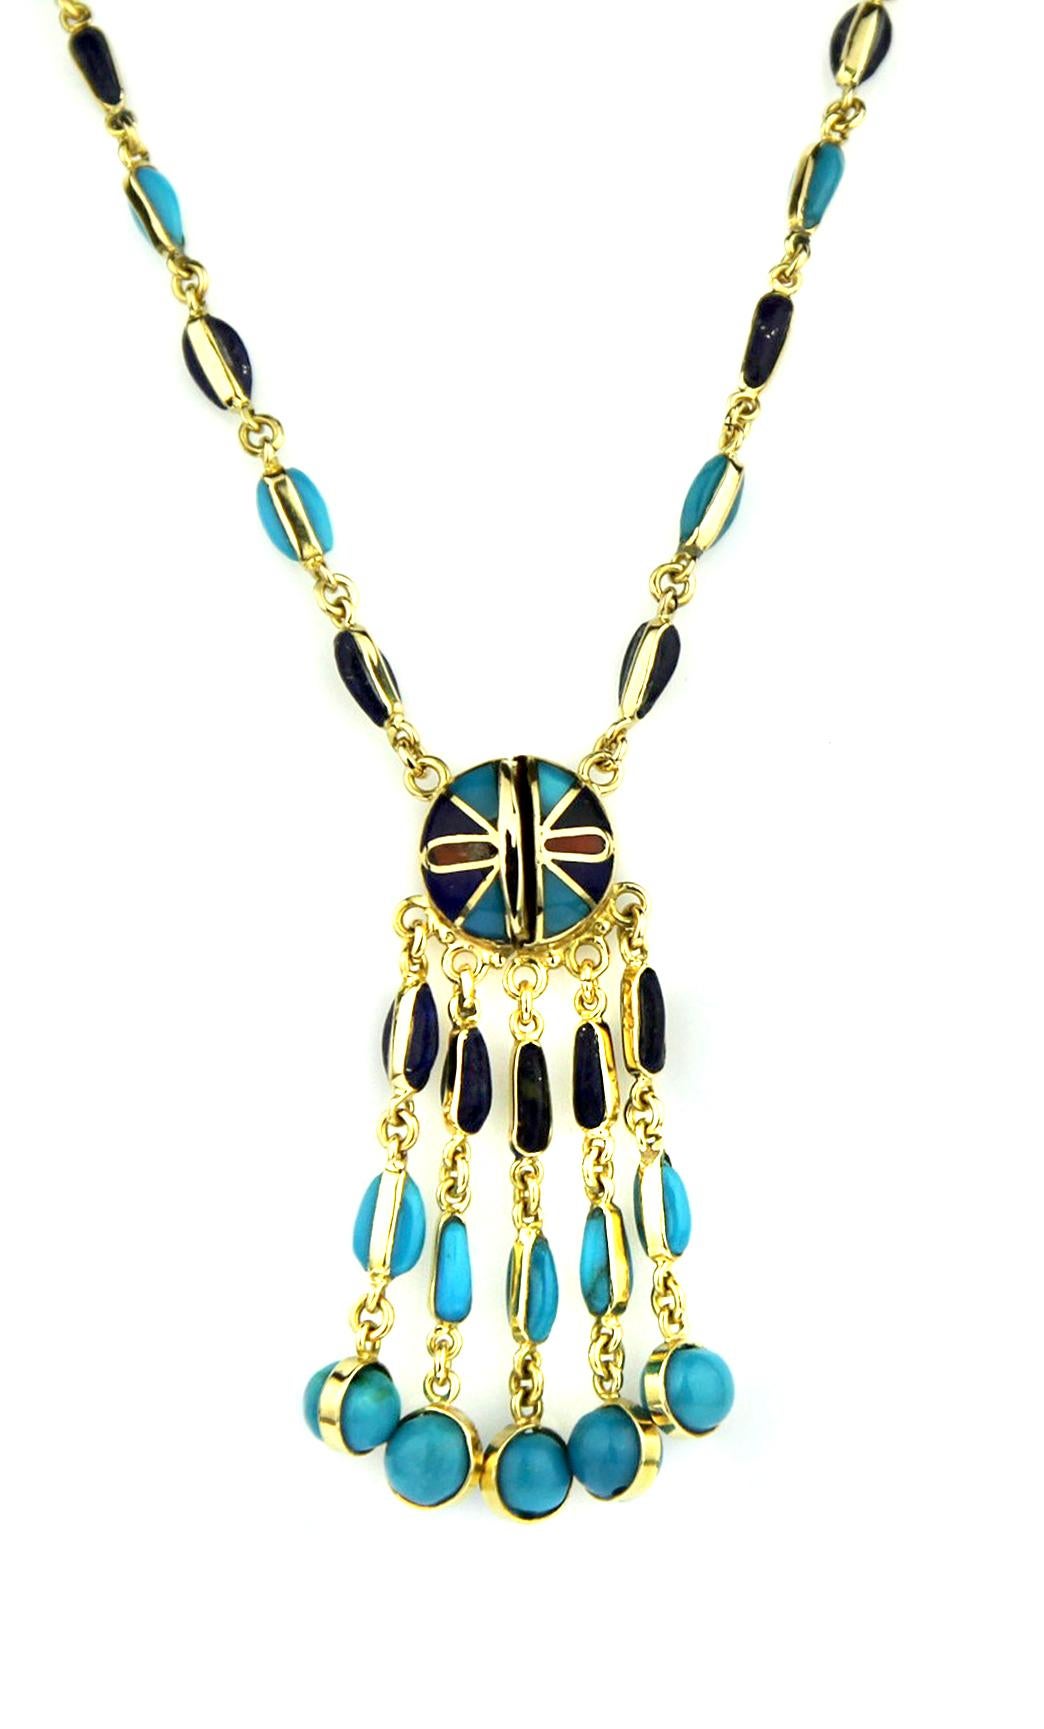 Vintage Eagle Necklace in 18K Gold, Coral, Lapis Lazuli, and Turquoise Mosaics For Sale 1